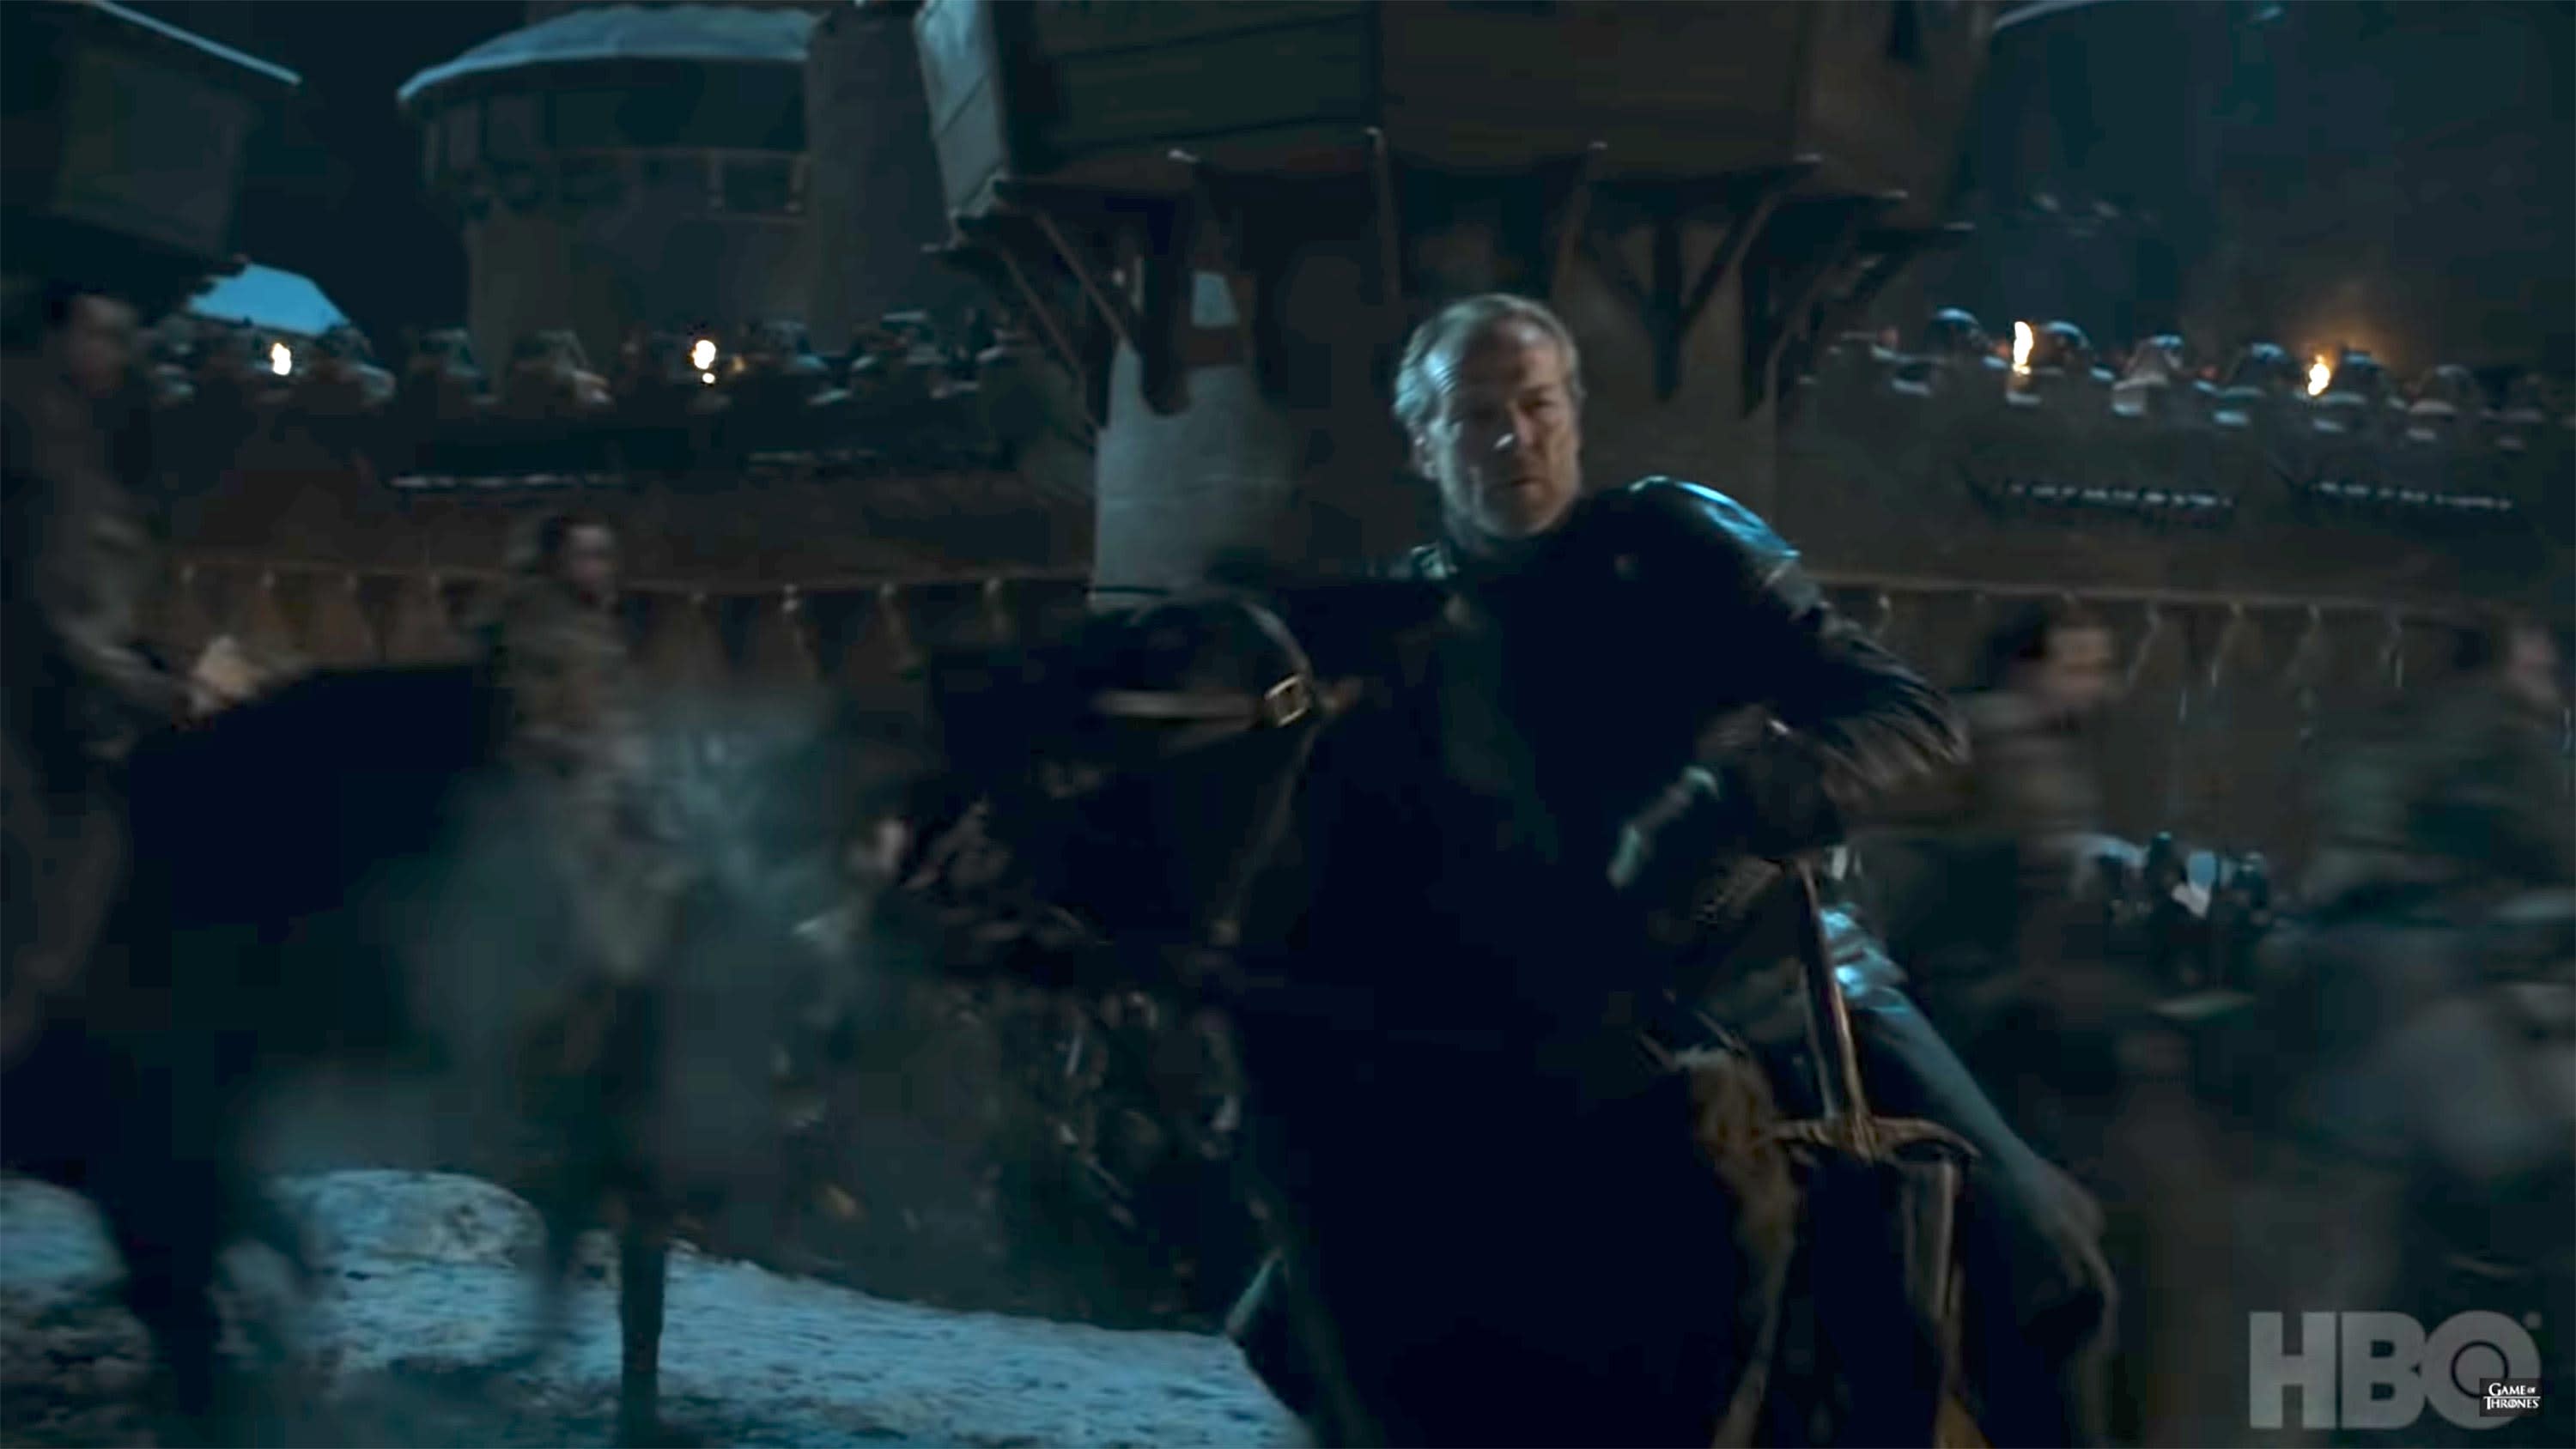 Game Of Thrones Season 8 Deep Dive What We See In The New Trailer